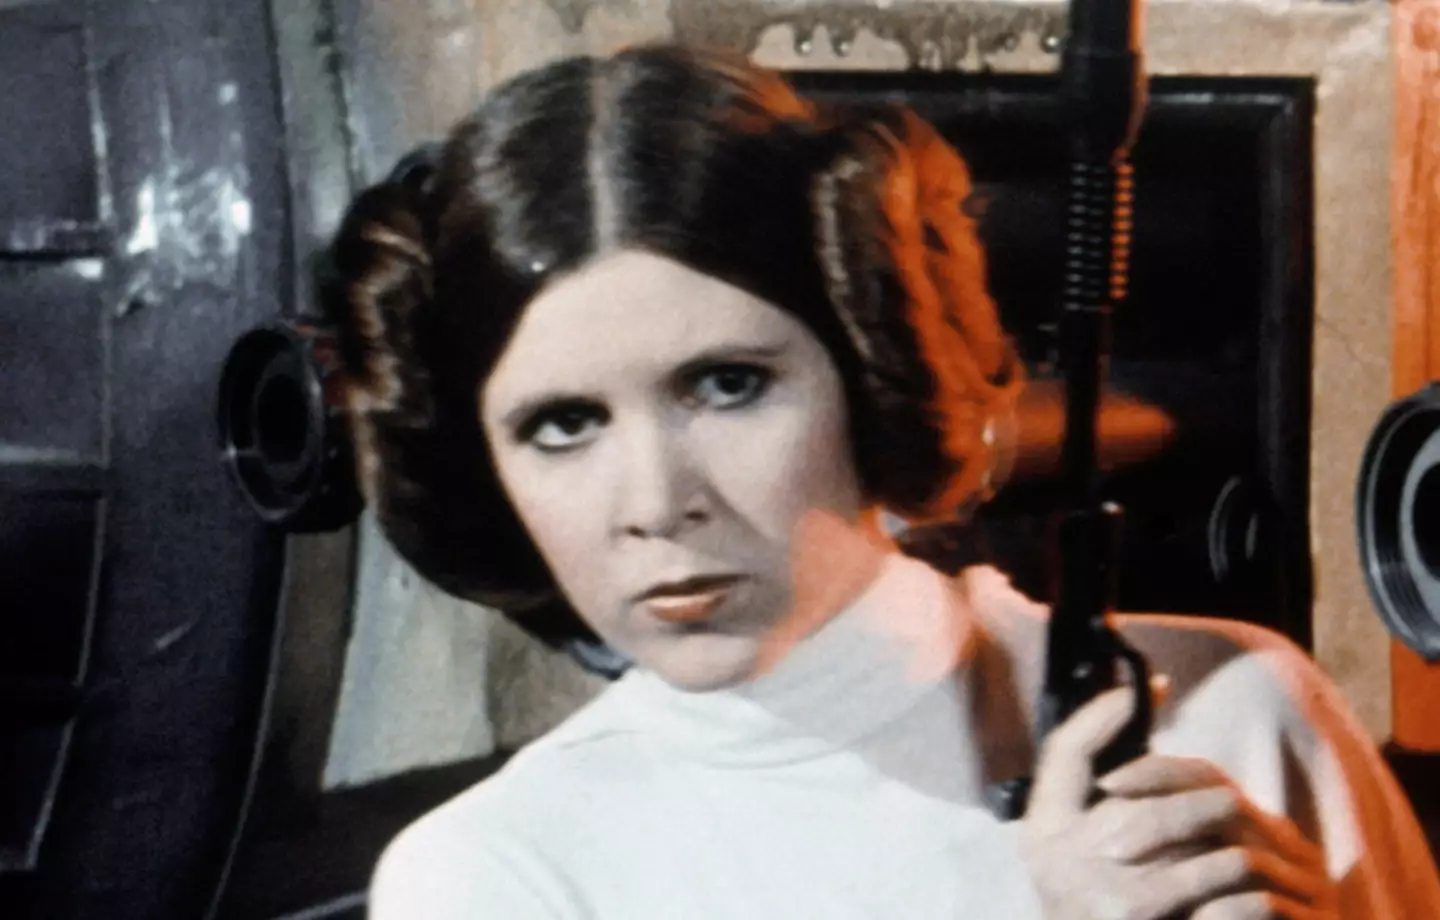 Carrie Fisher played Princess Leia in the franchise.